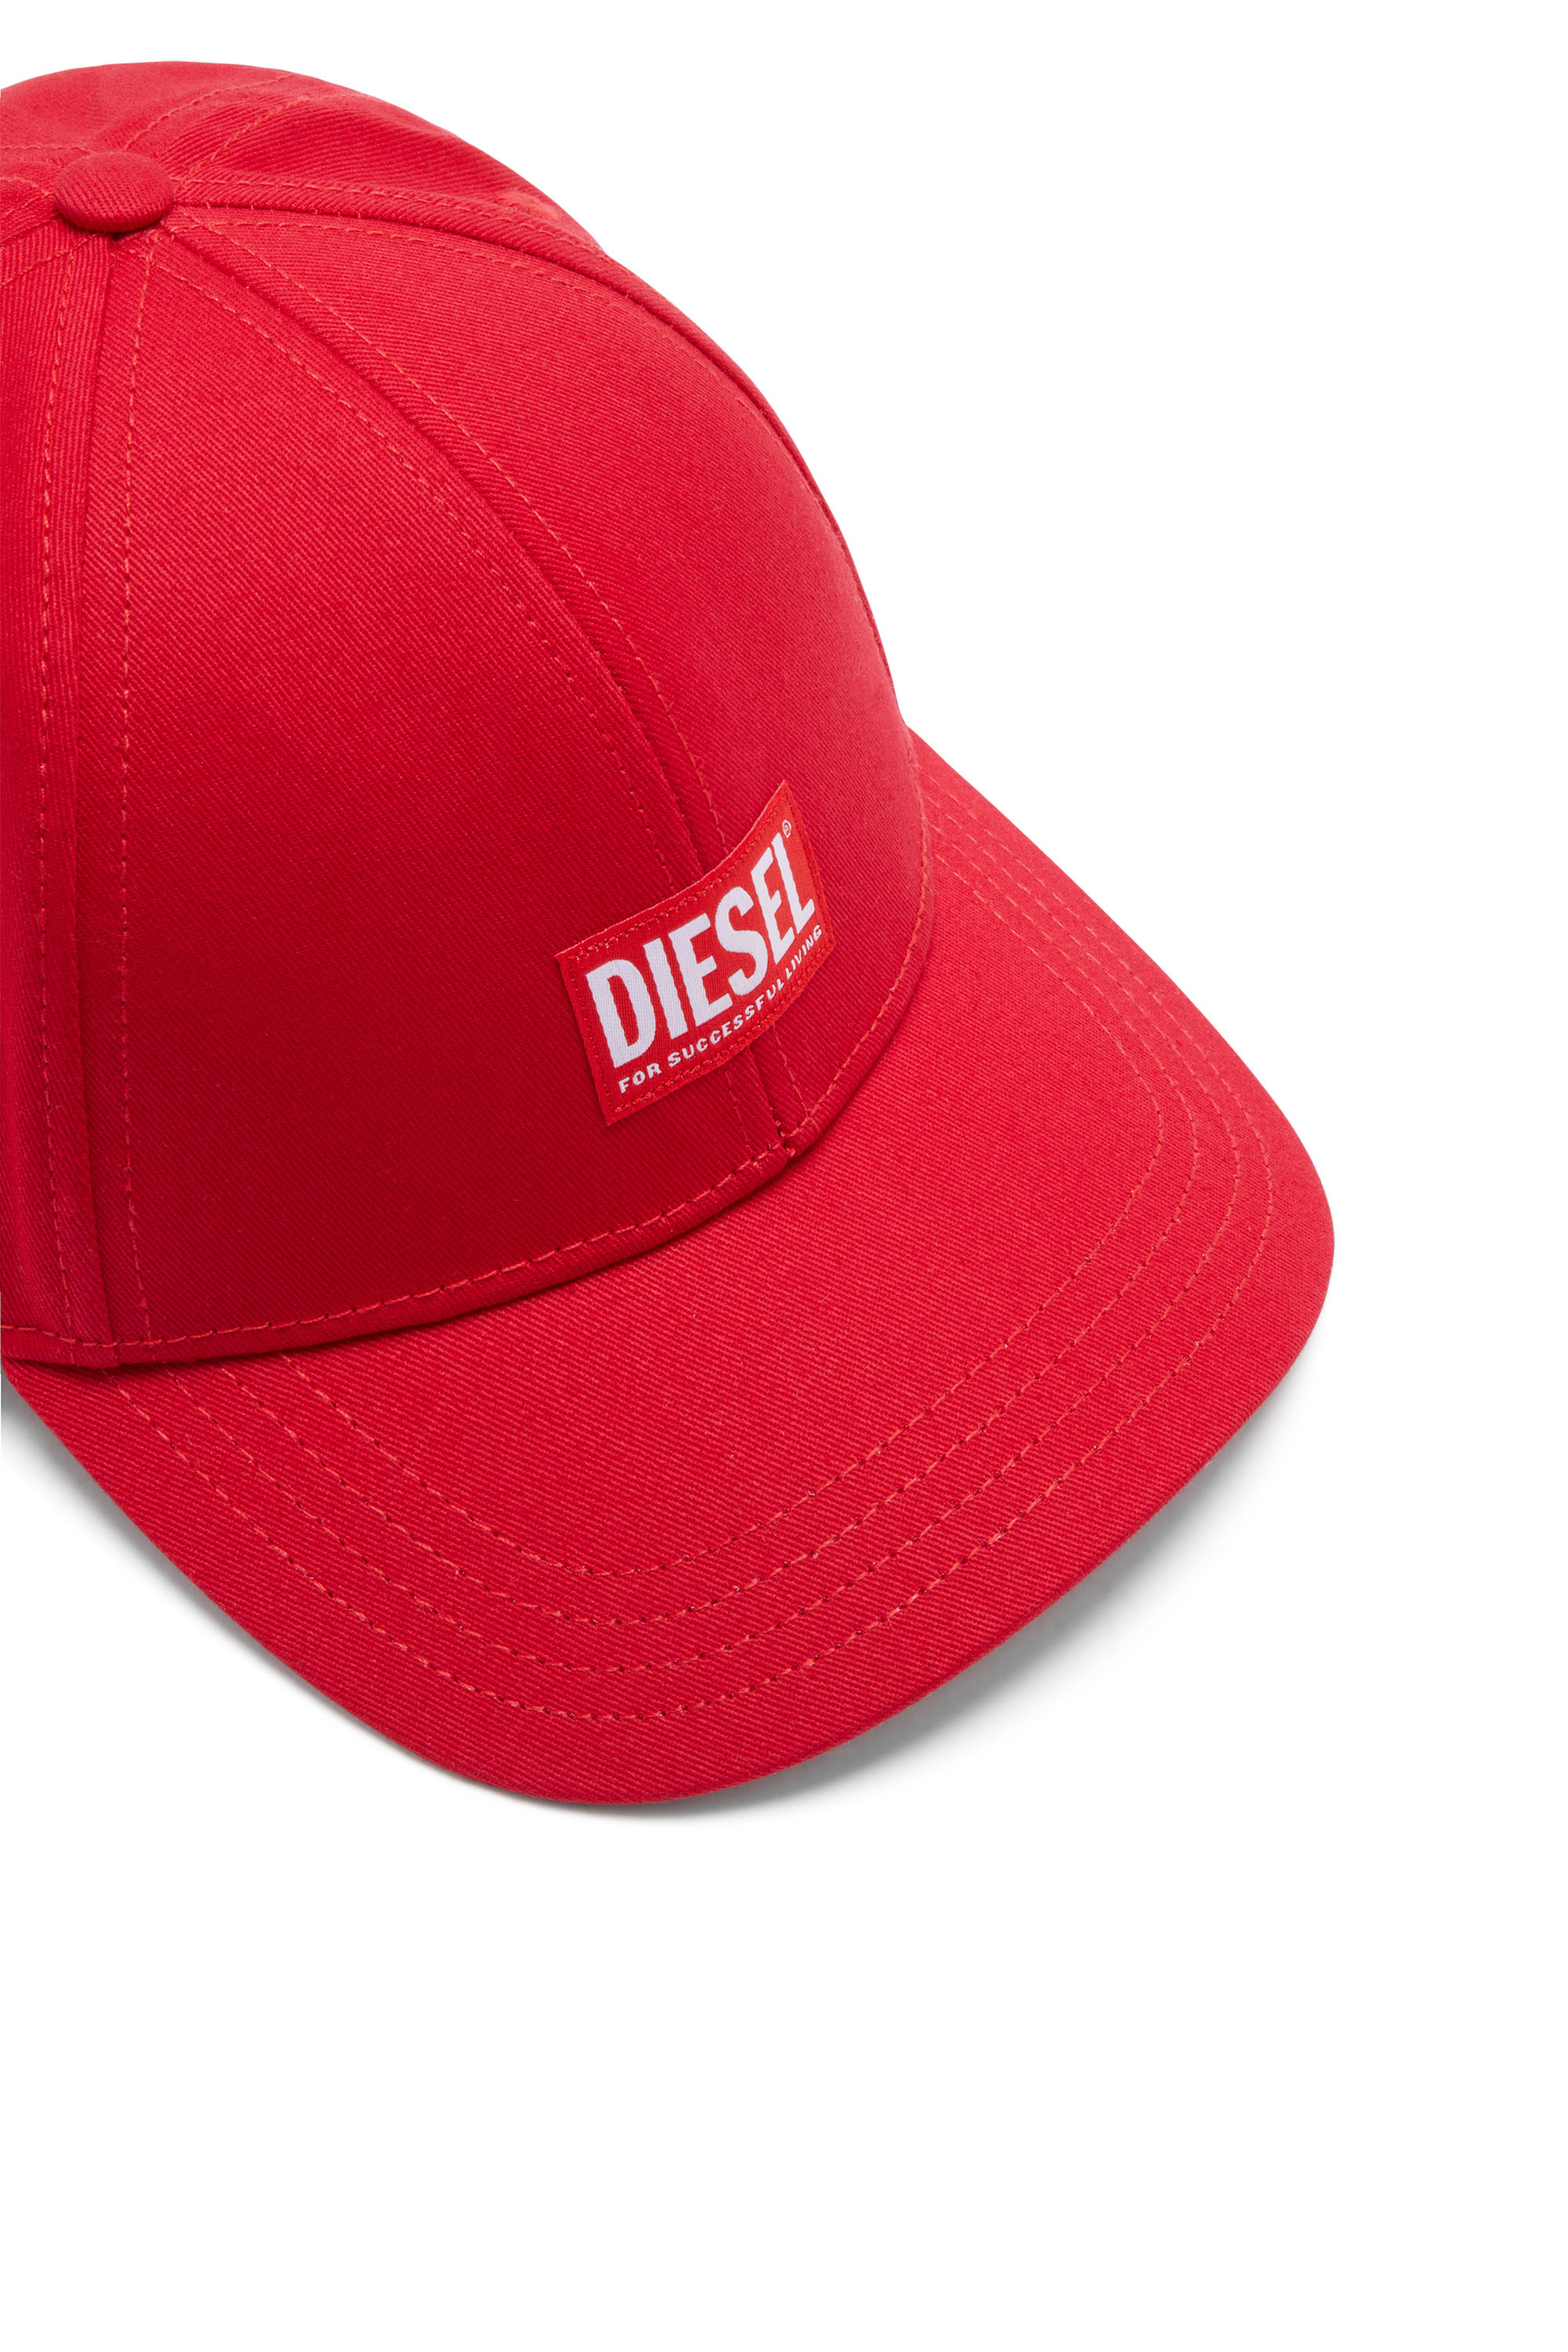 Diesel - CORRY-JACQ, Rosso - Image 3